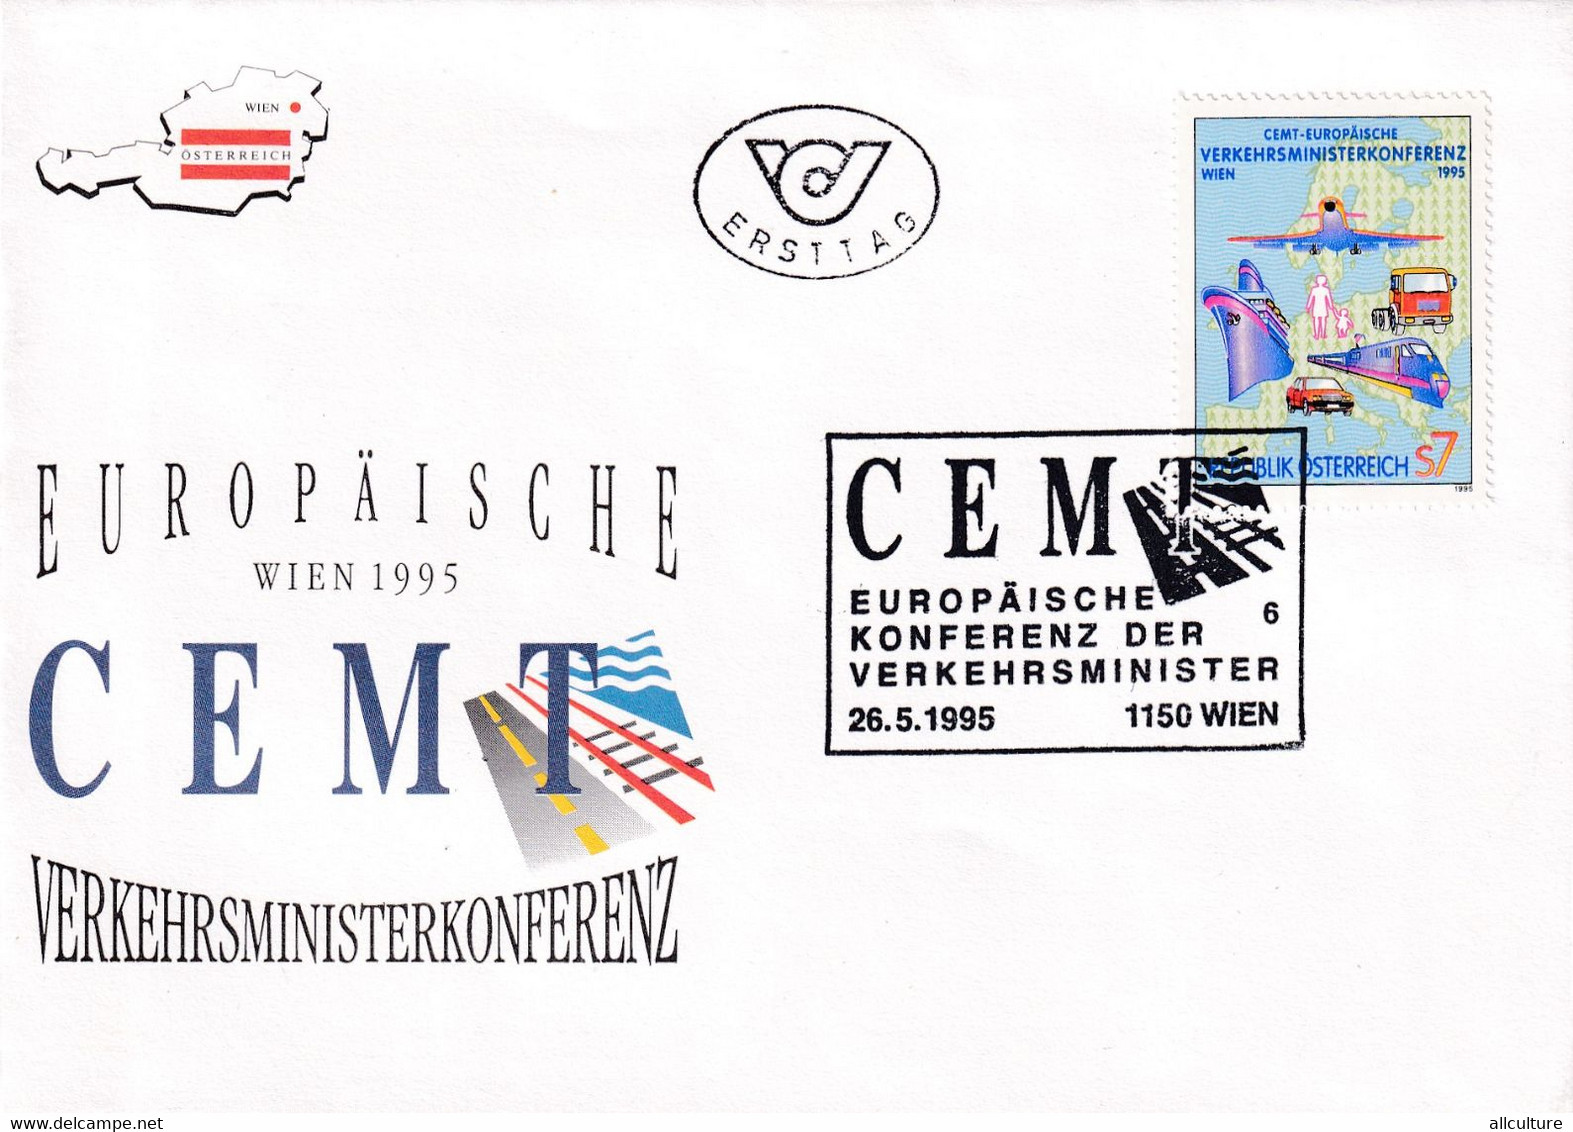 A8203- EUROPEAN CONFERENCE OF THE MINISTERS FOR TRANSPORT 1995  REPUBLIC OESTERREICH USED STAMP ON COVER AUSTRIA - Brieven En Documenten